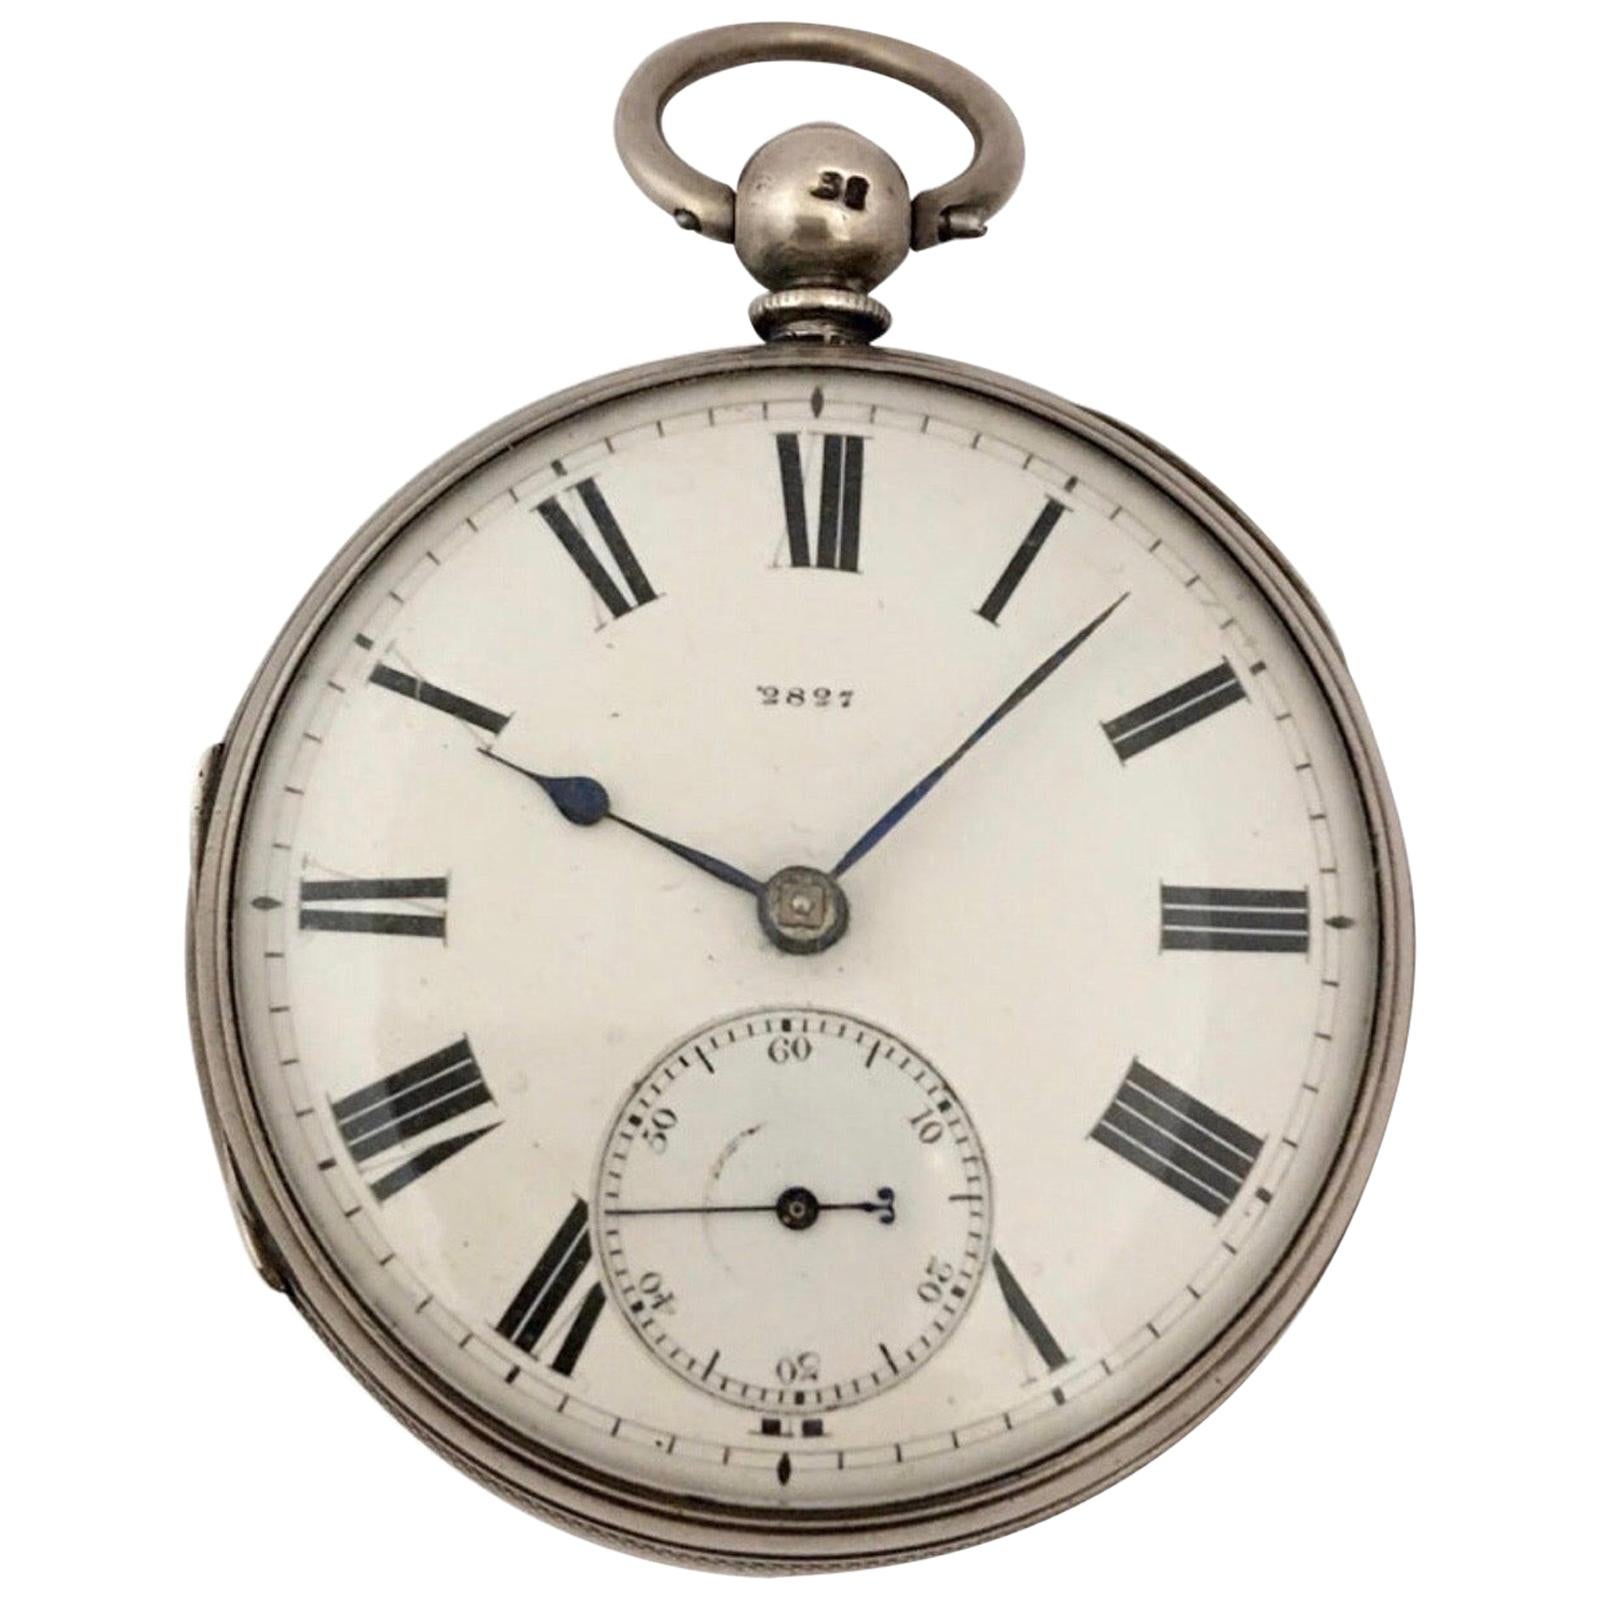 Heavy English Lever Fusee Silver Engine Turned Case Pocket Watch, circa 1866